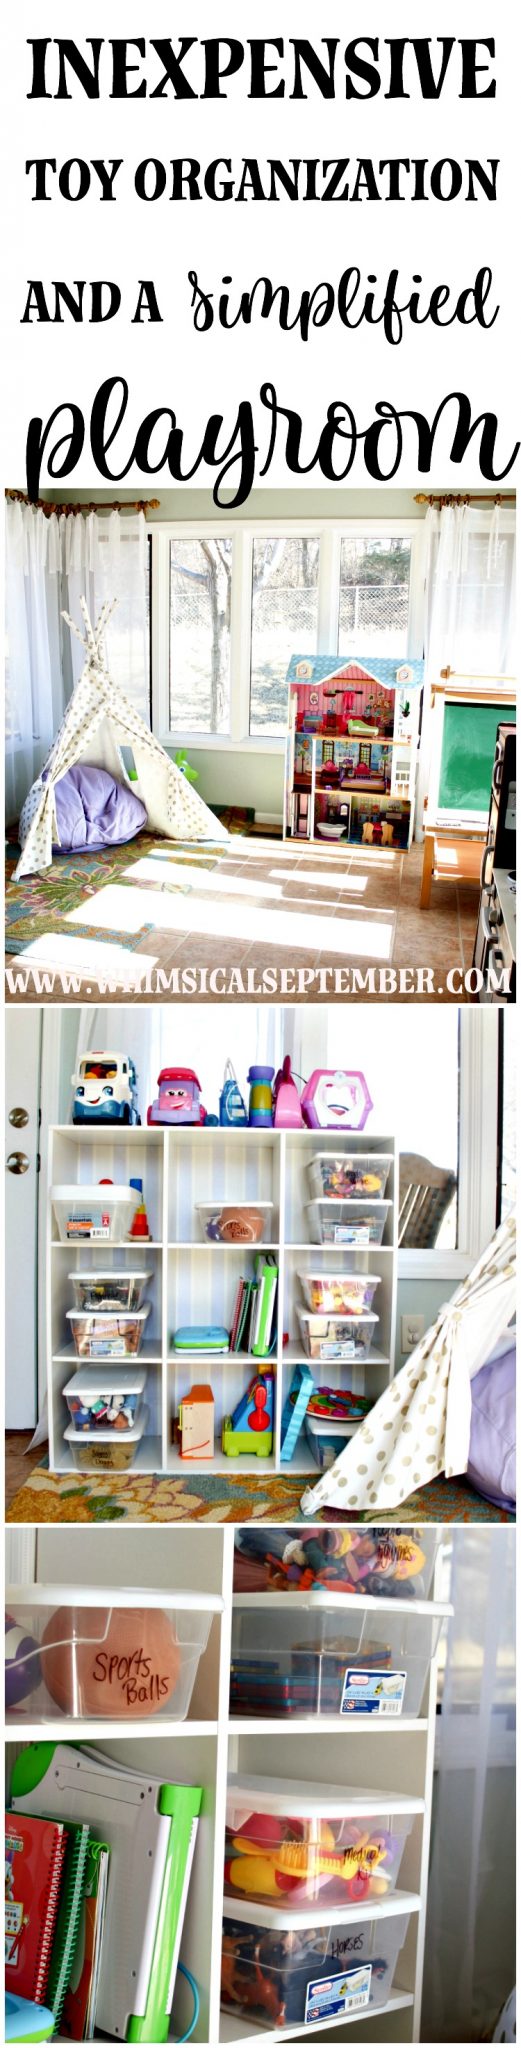 Toy Organization and a Simplified Playroom